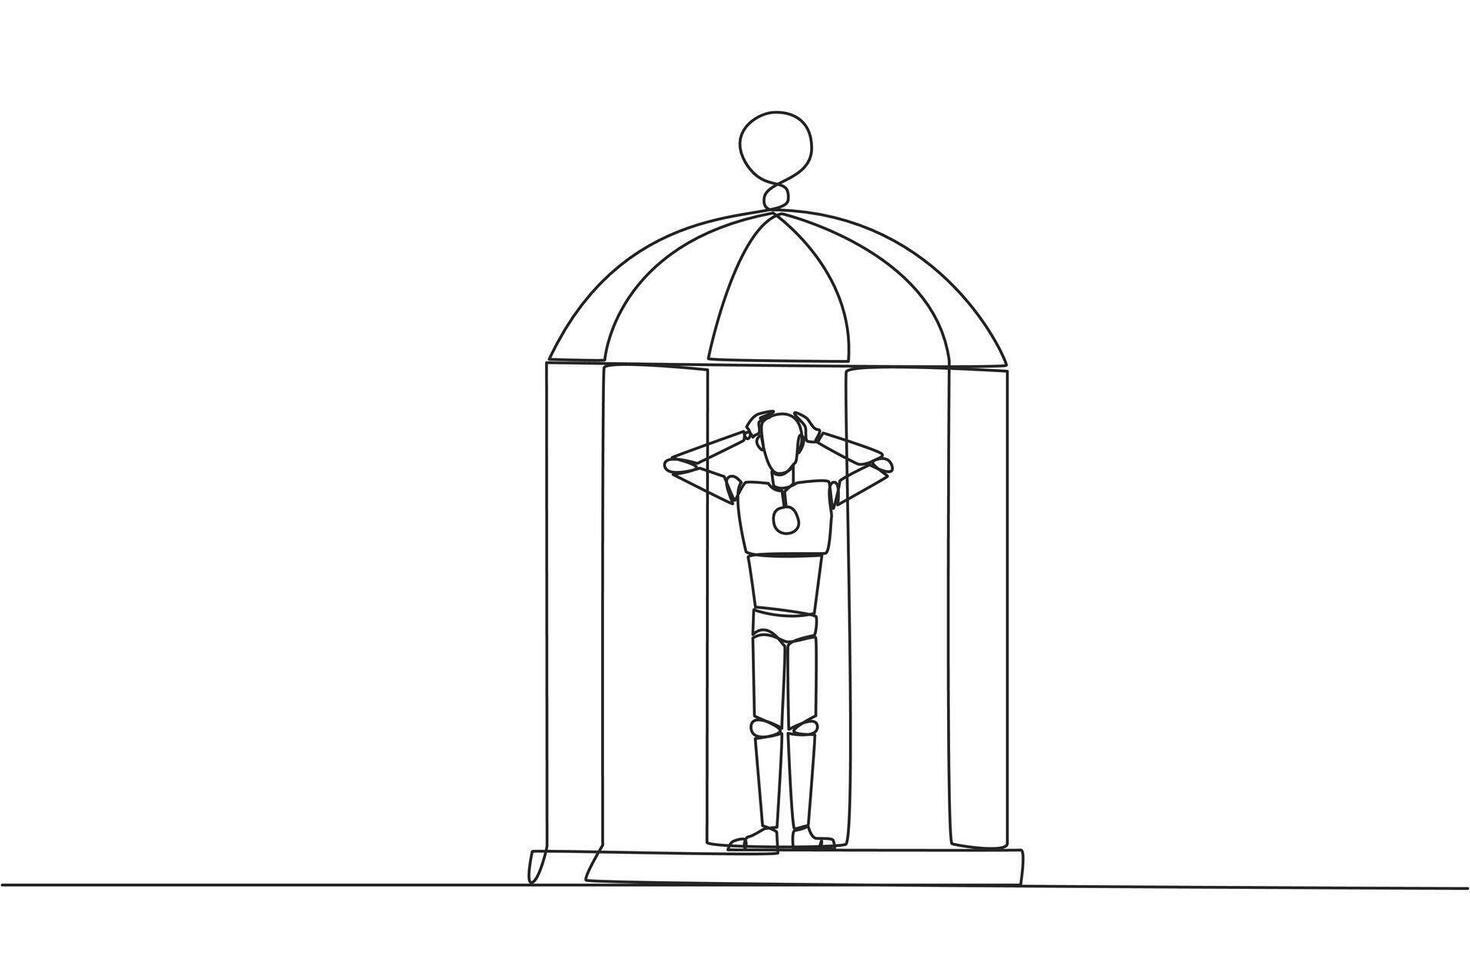 Single continuous line drawing tired robot trapped in the cage standing frustrated holding head. Anxiety caused cannot move freely. Confined. Imprisoned. AI tech. One line design vector illustration